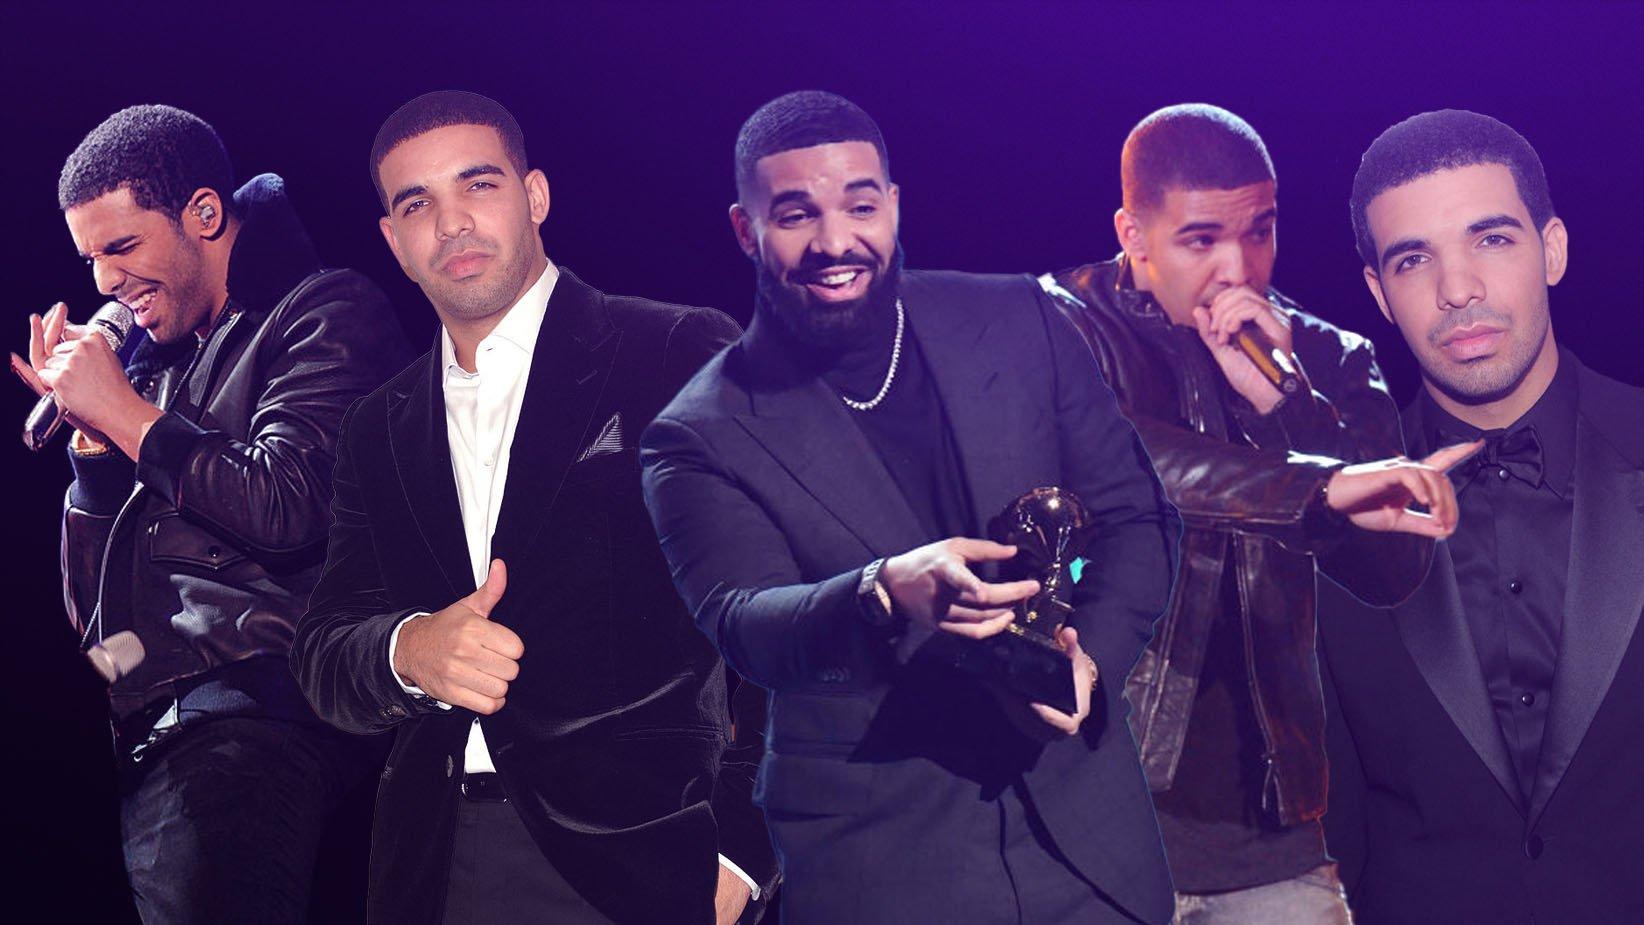 Drake in 2011, 2009, 2019, 2010 and 2011